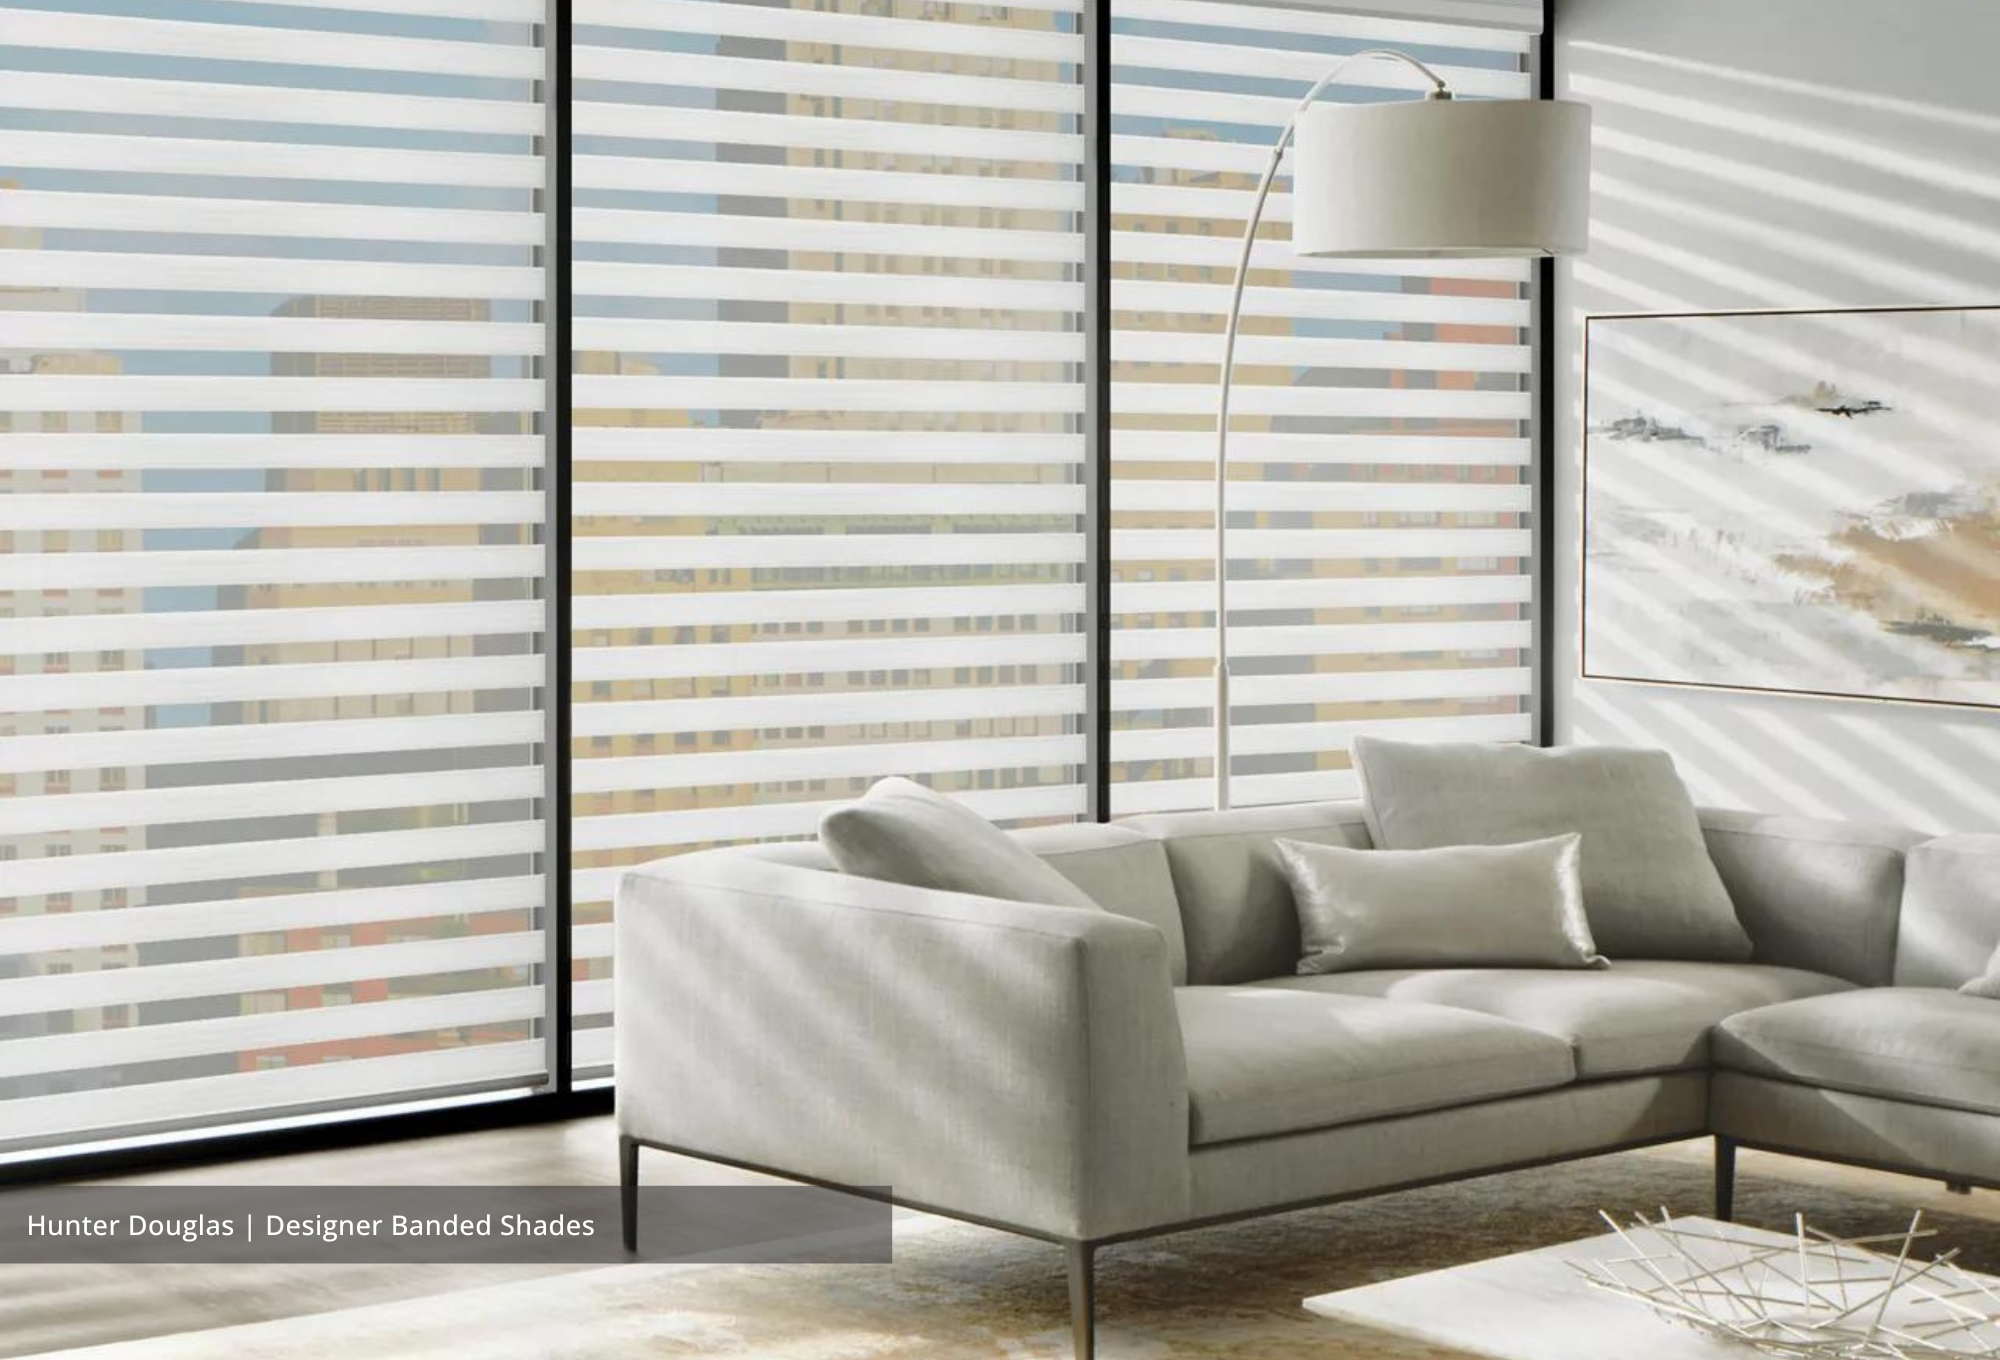 Hunter Douglas Banded Shades available at JC Licht